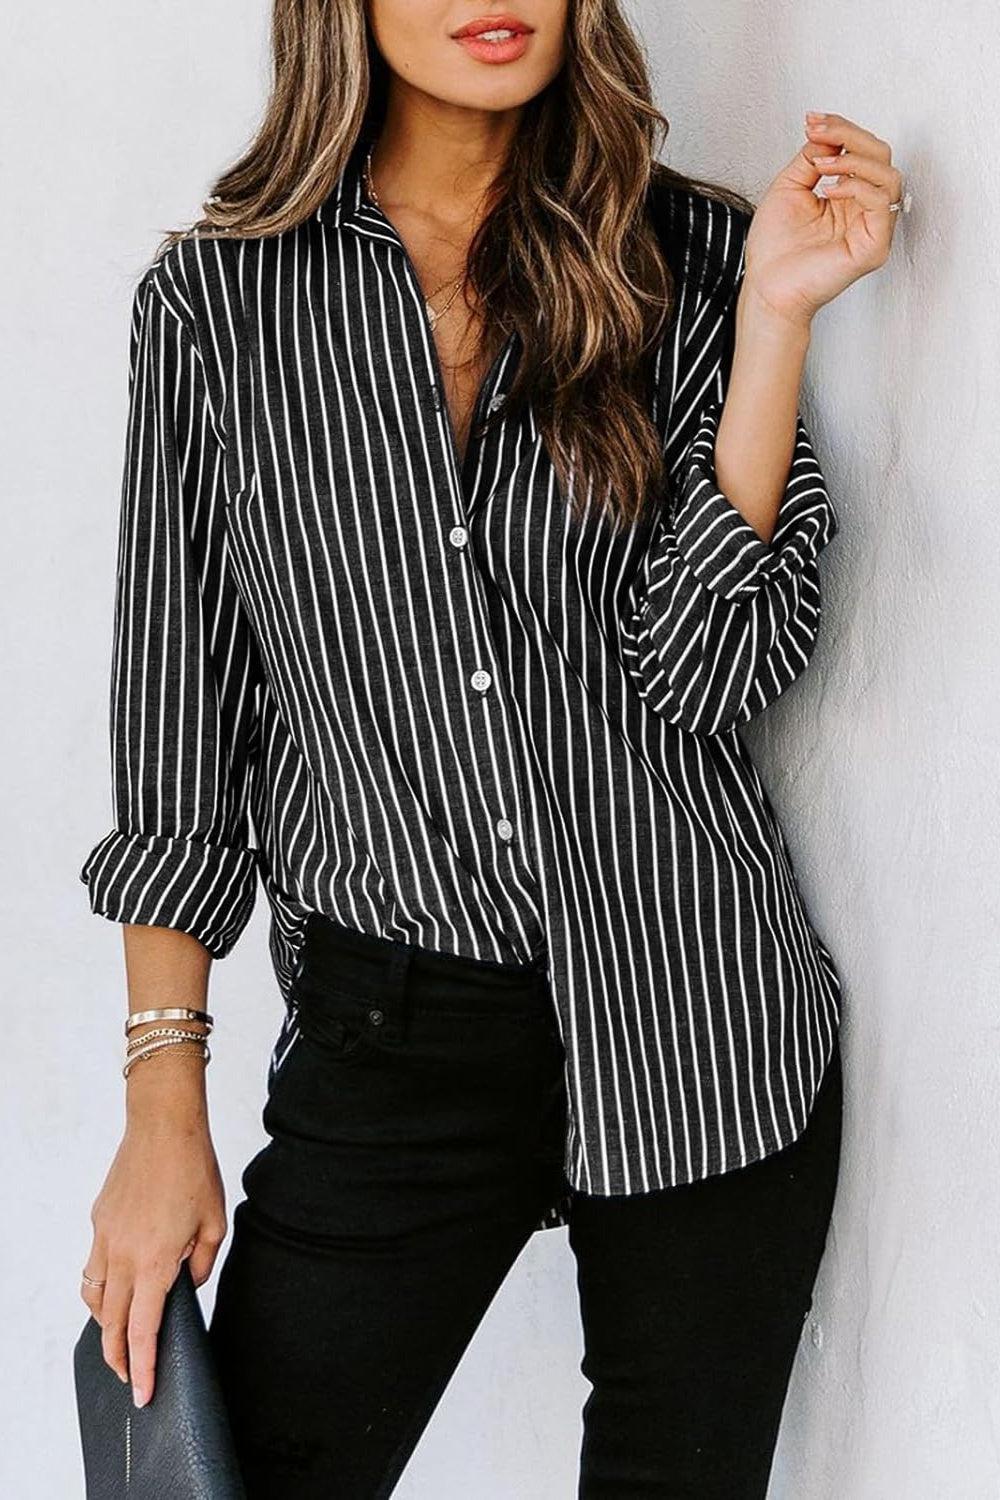 a woman leaning against a wall wearing a black and white striped shirt